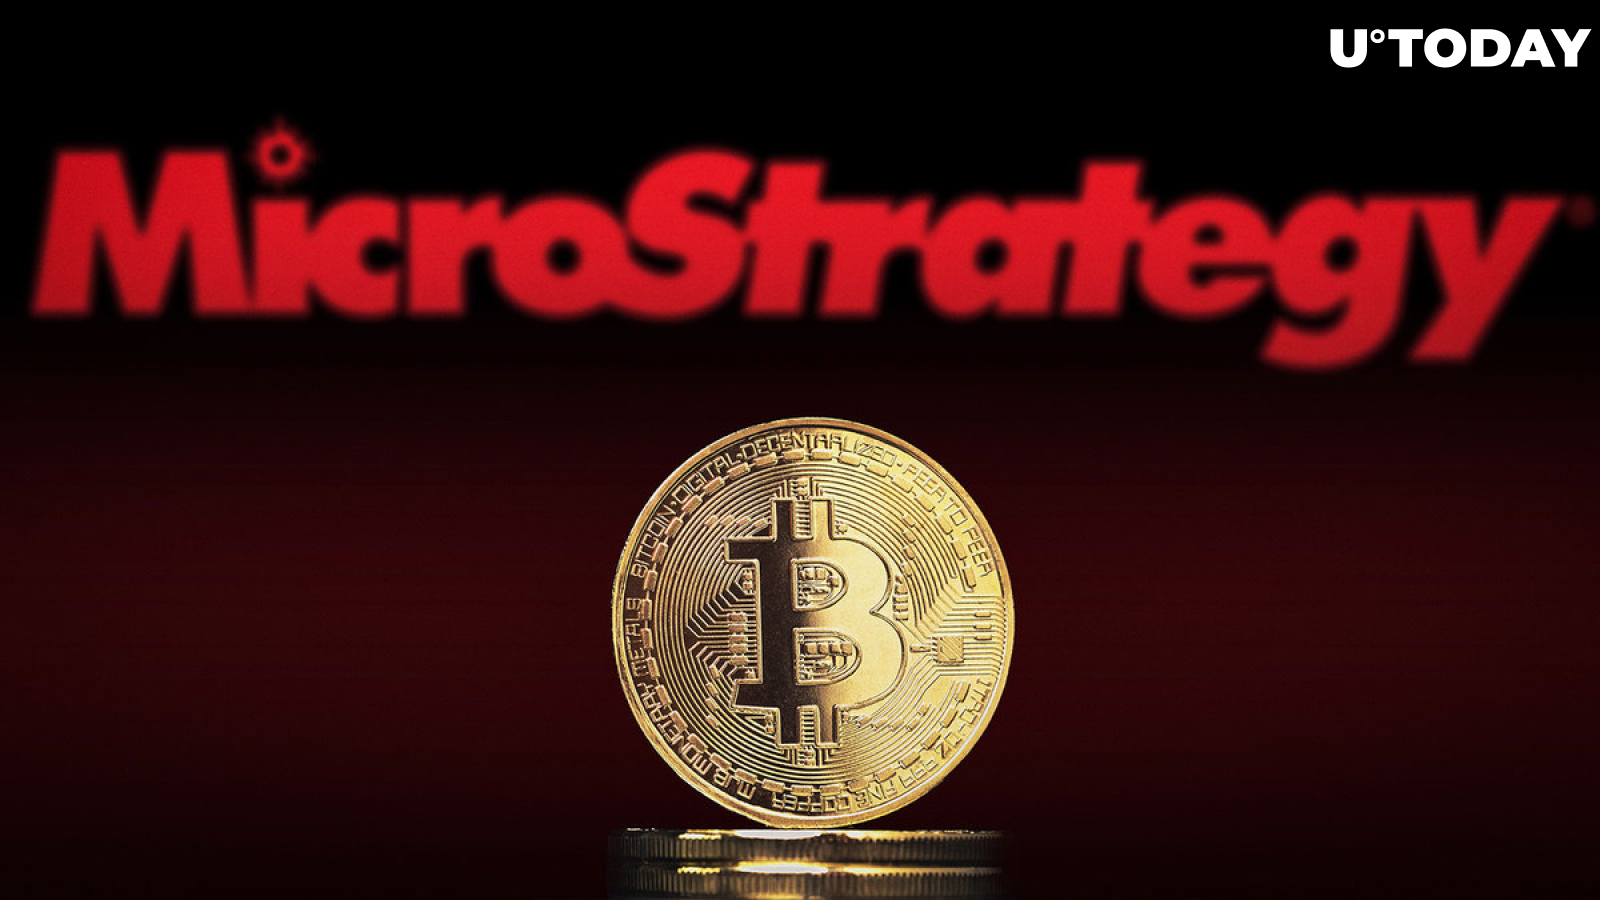 MicroStrategy Returns To Buy More Bitcoin, Will This Impact BTC Price?